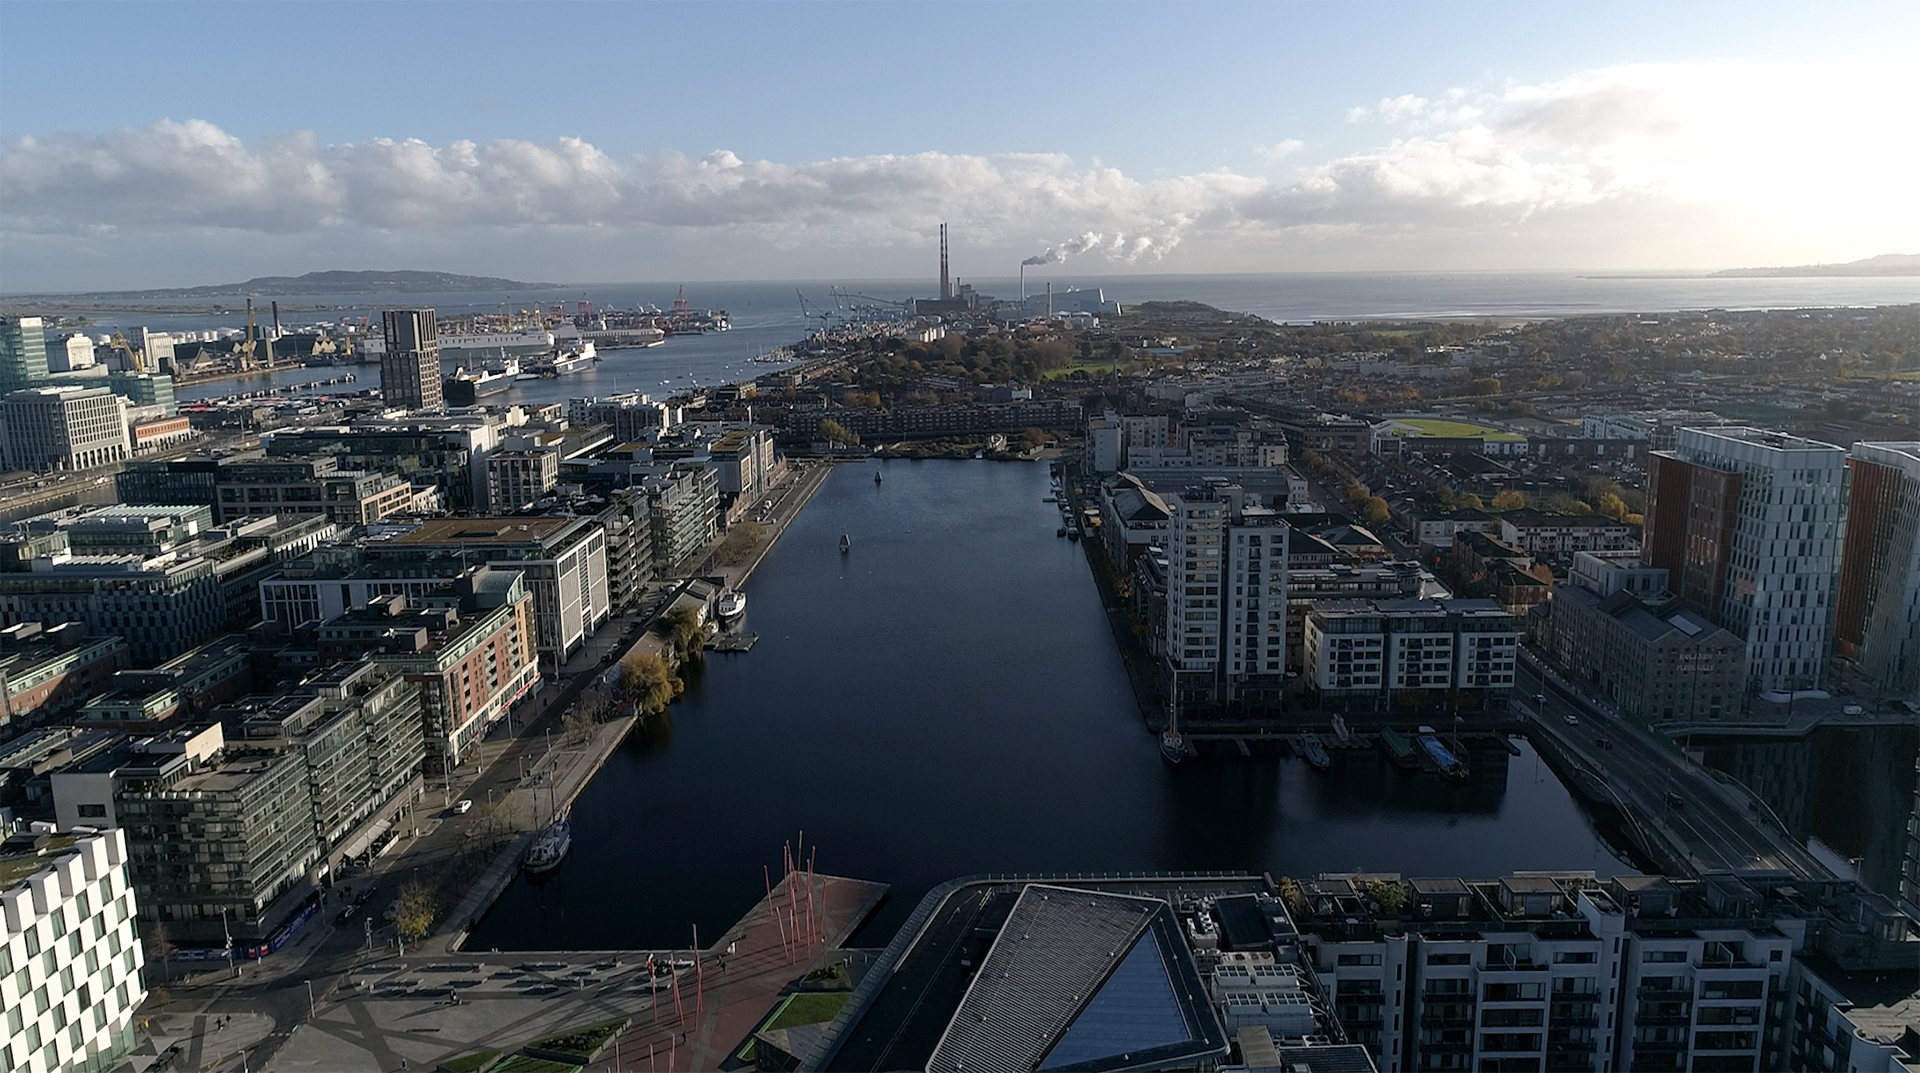 View from Grand Canal Docks to Poolbeg - One Little Studio - Drone Photography